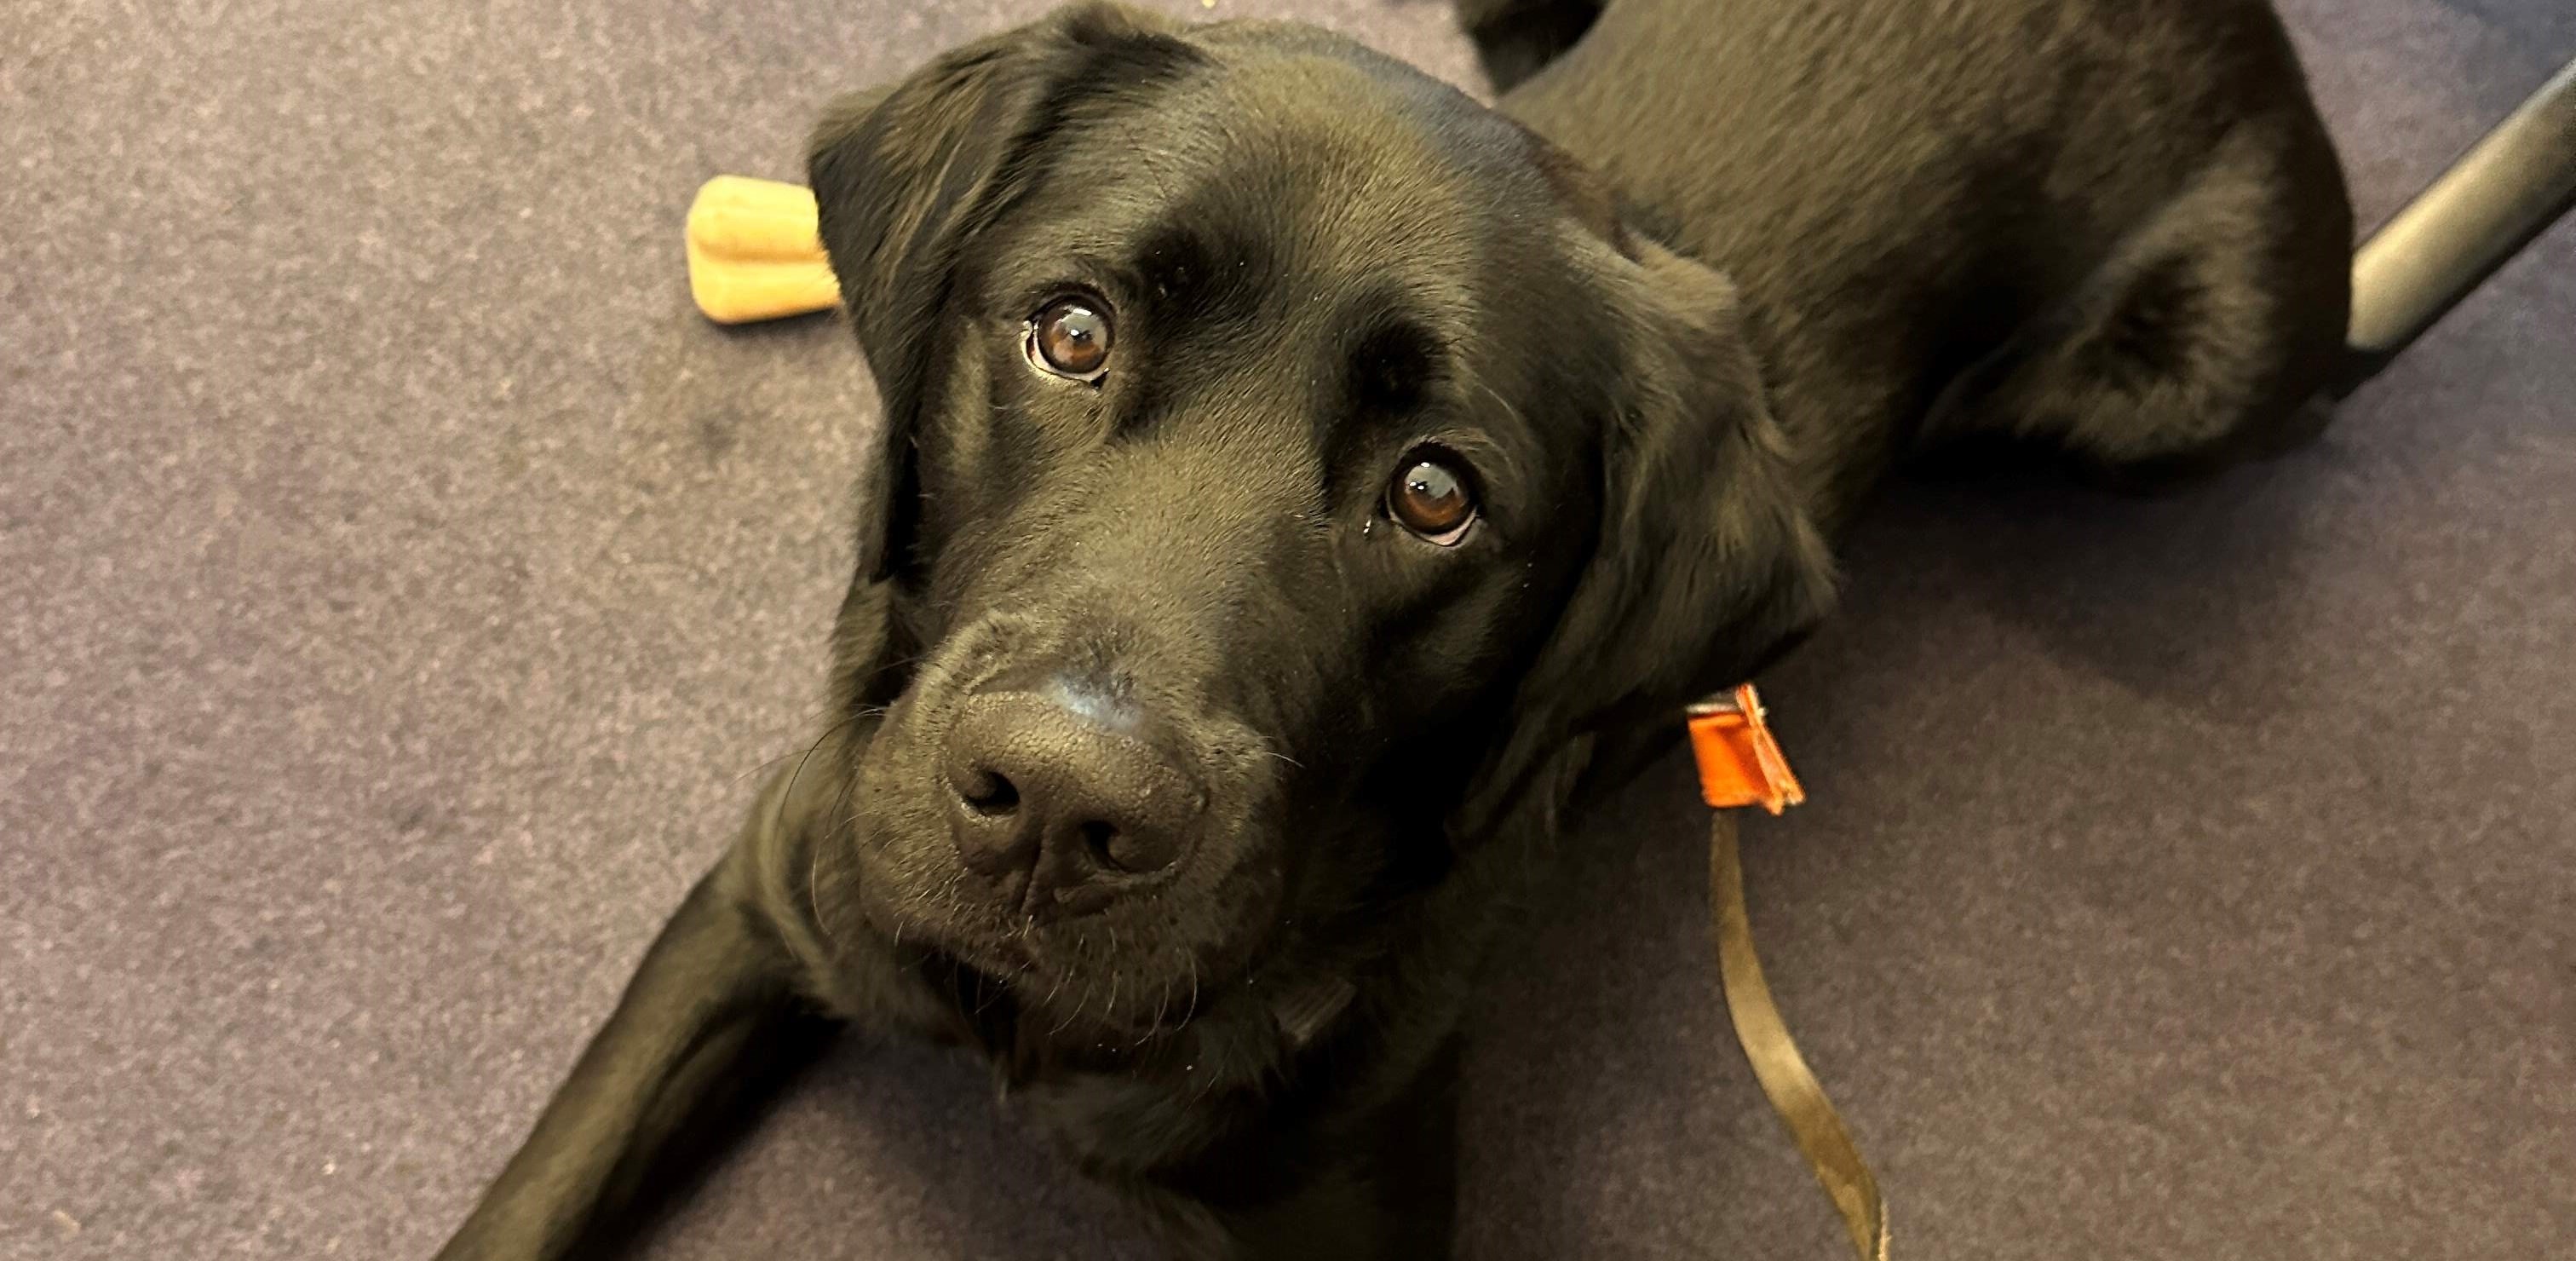 Nairn the guide dog